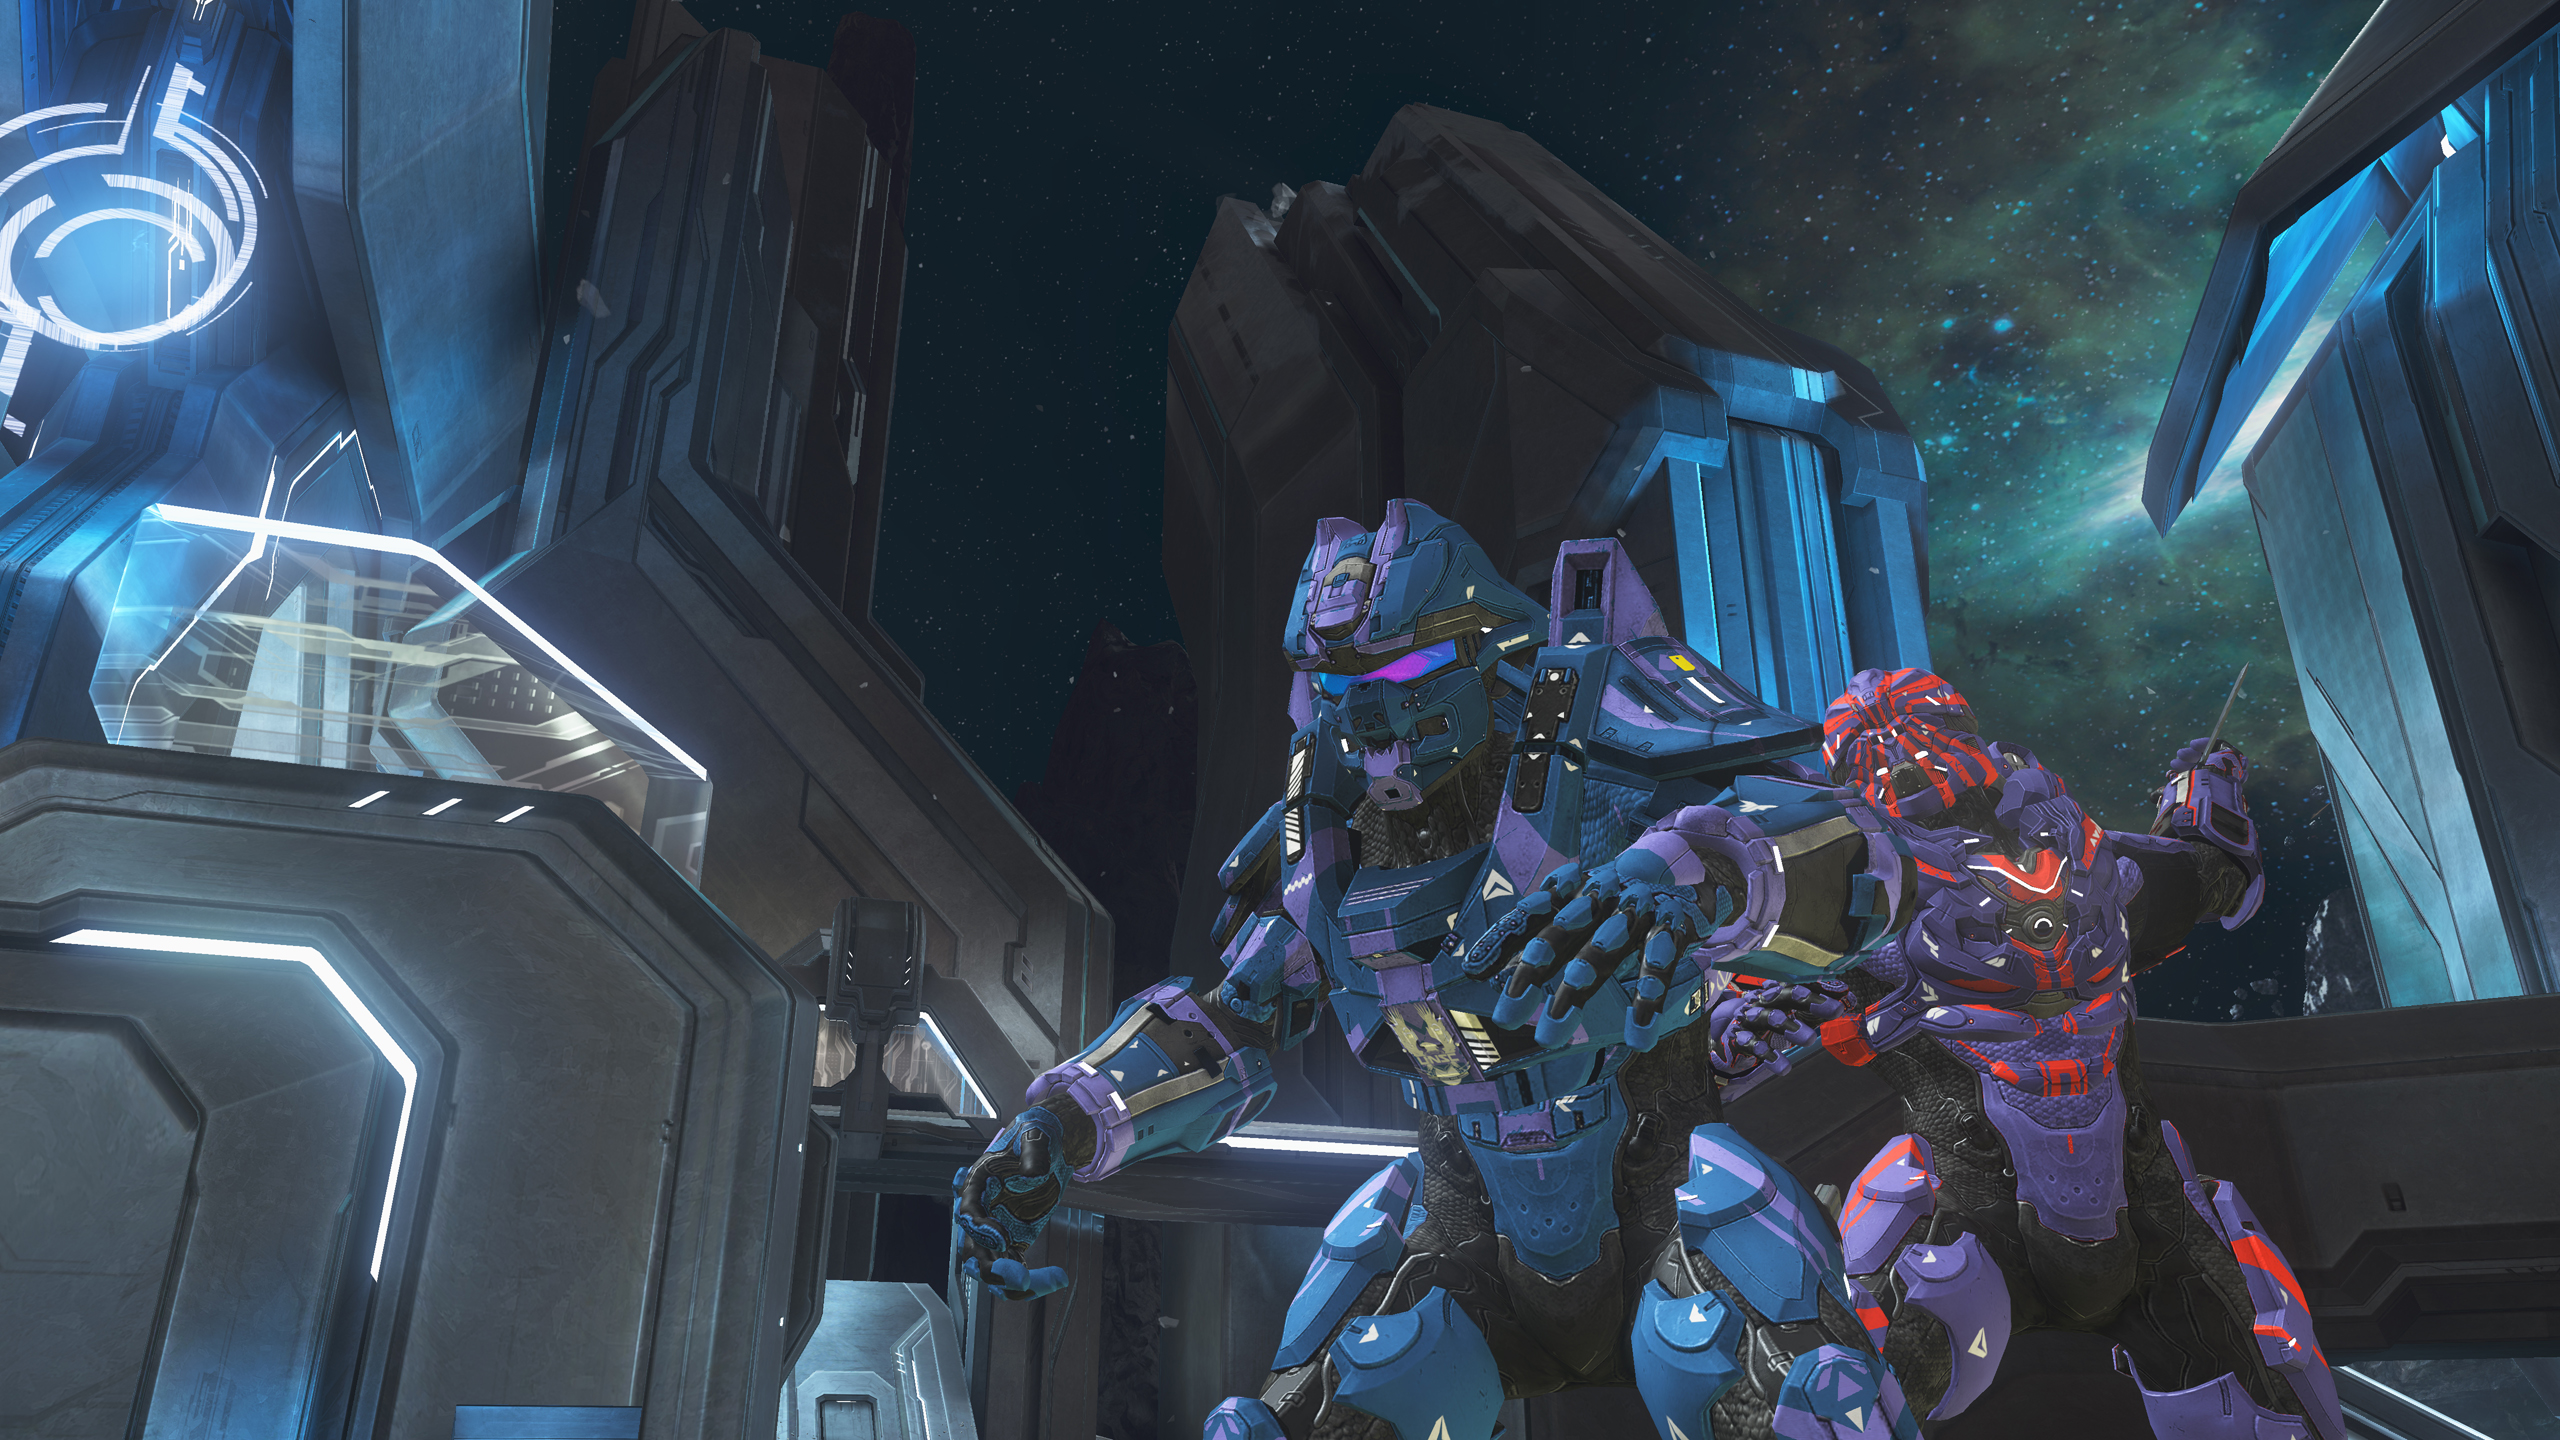 Halo 4's Majestic Map Pack trailer, screenshots and official details, now with the Infinity Rumble game type